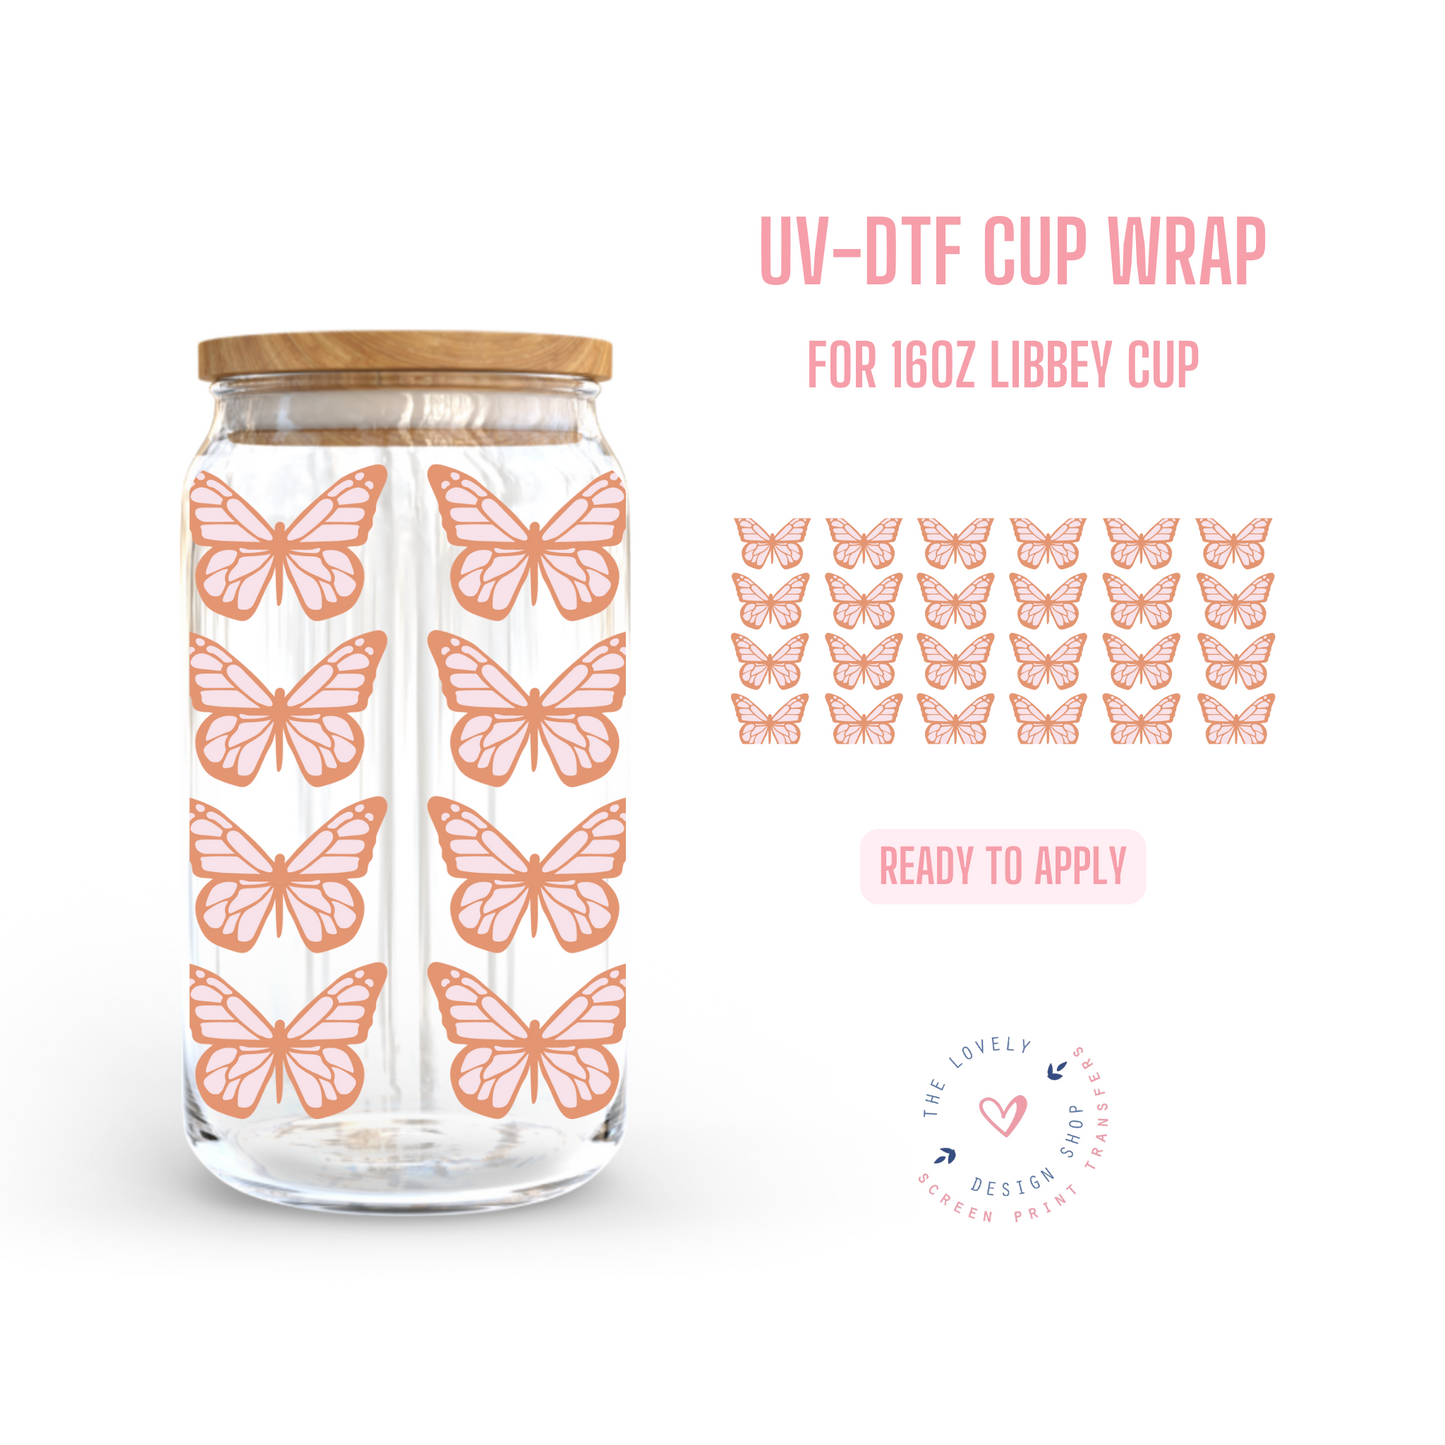 Retro Butterflies - UV DTF 16 oz Libbey Cup Wrap (Ready to Ship)